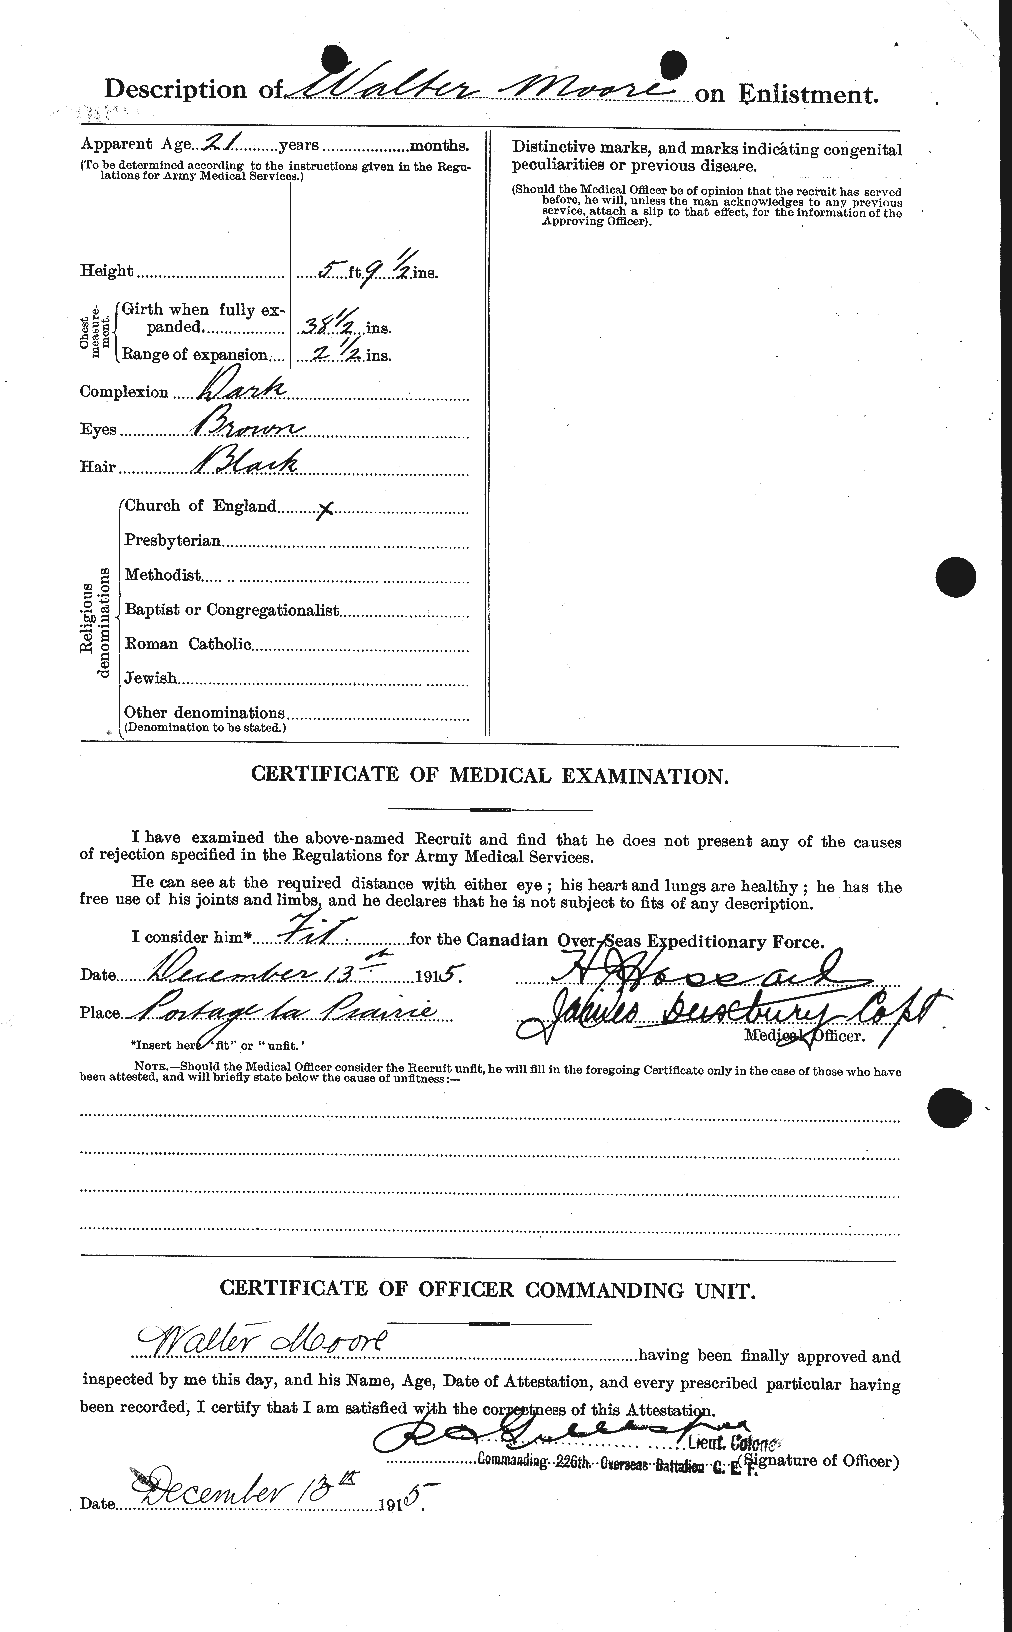 Personnel Records of the First World War - CEF 505691b